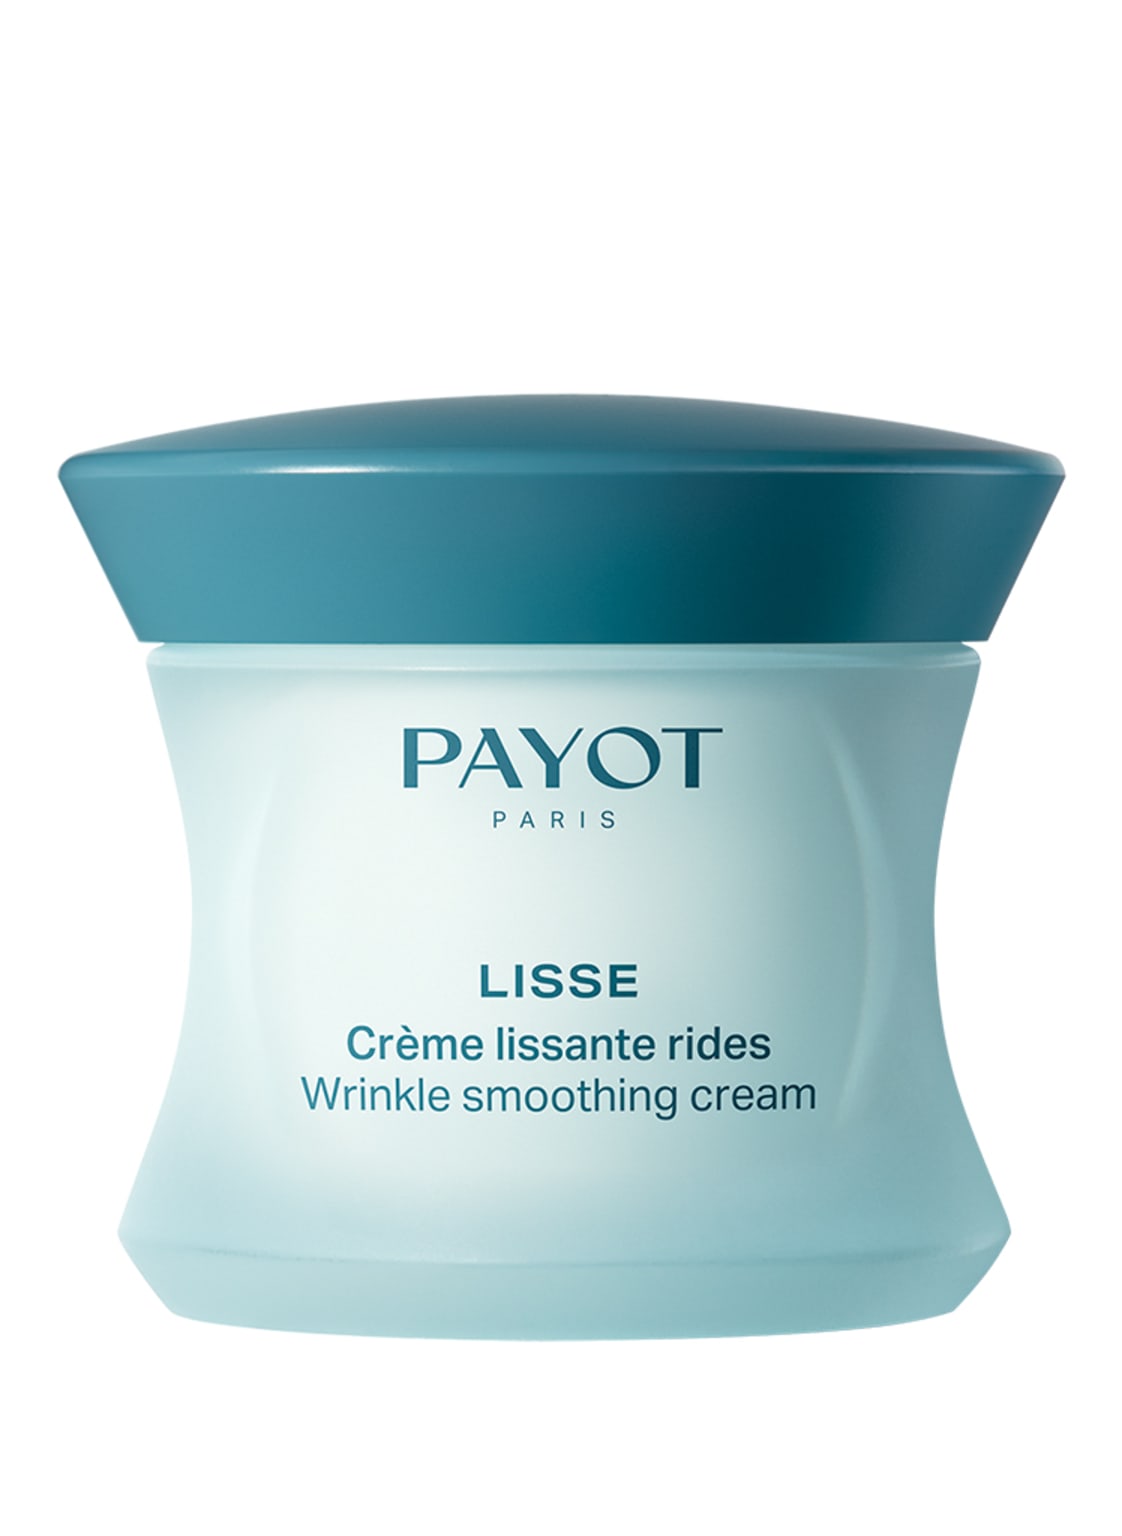 Payot Lisse Wrinkle Smoothing Cream 50 ml von PAYOT